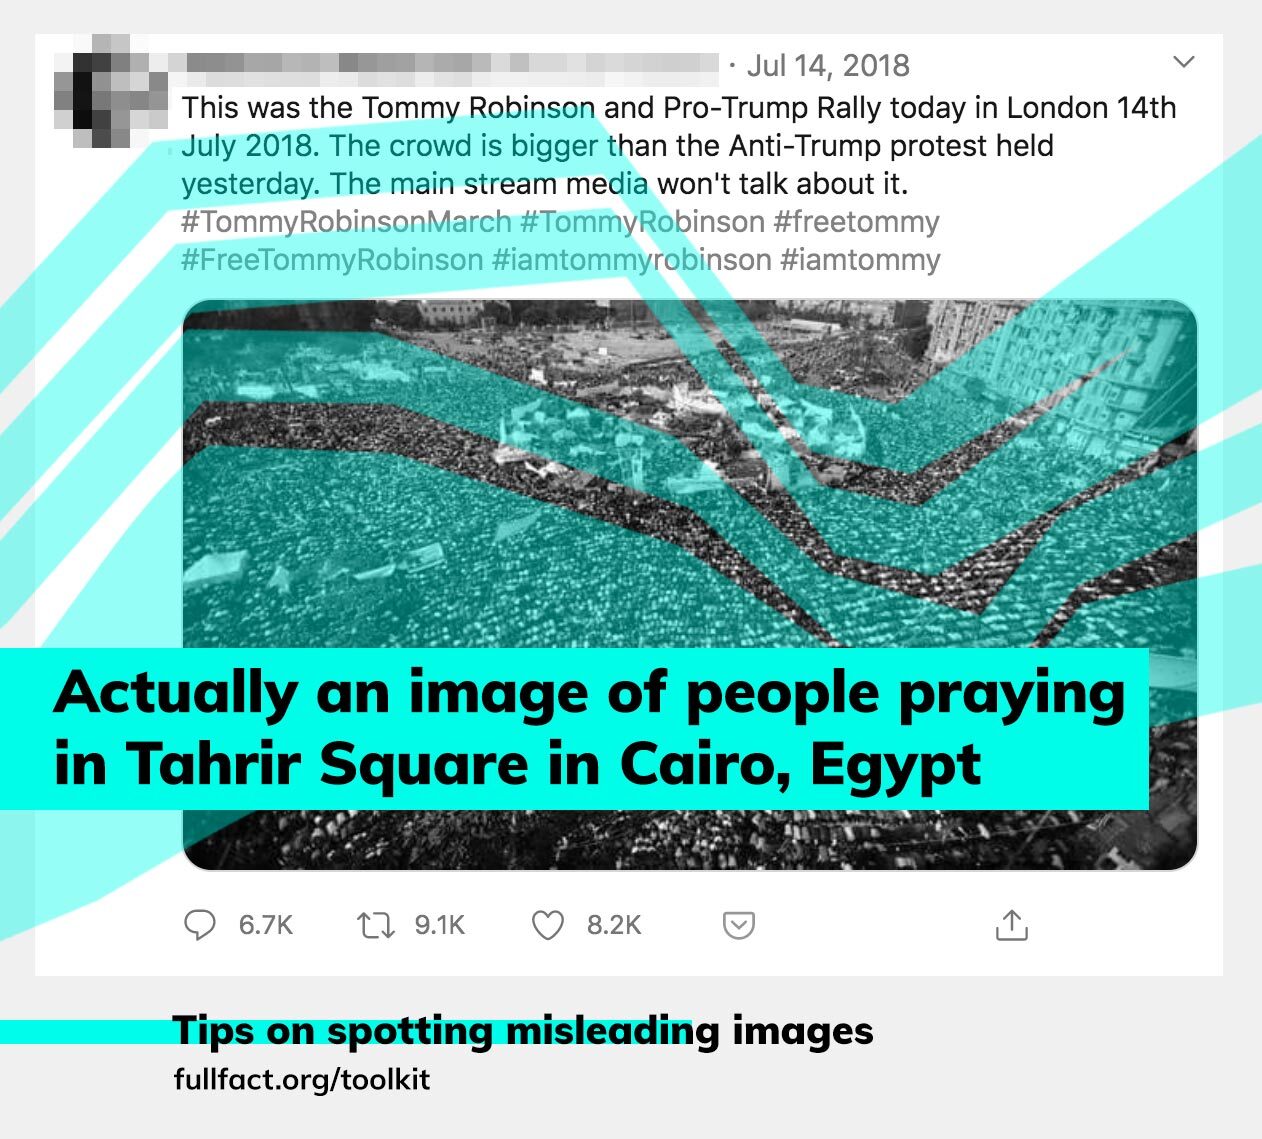 spotting-misleading-images-tahrirsq How to spot misleading images online